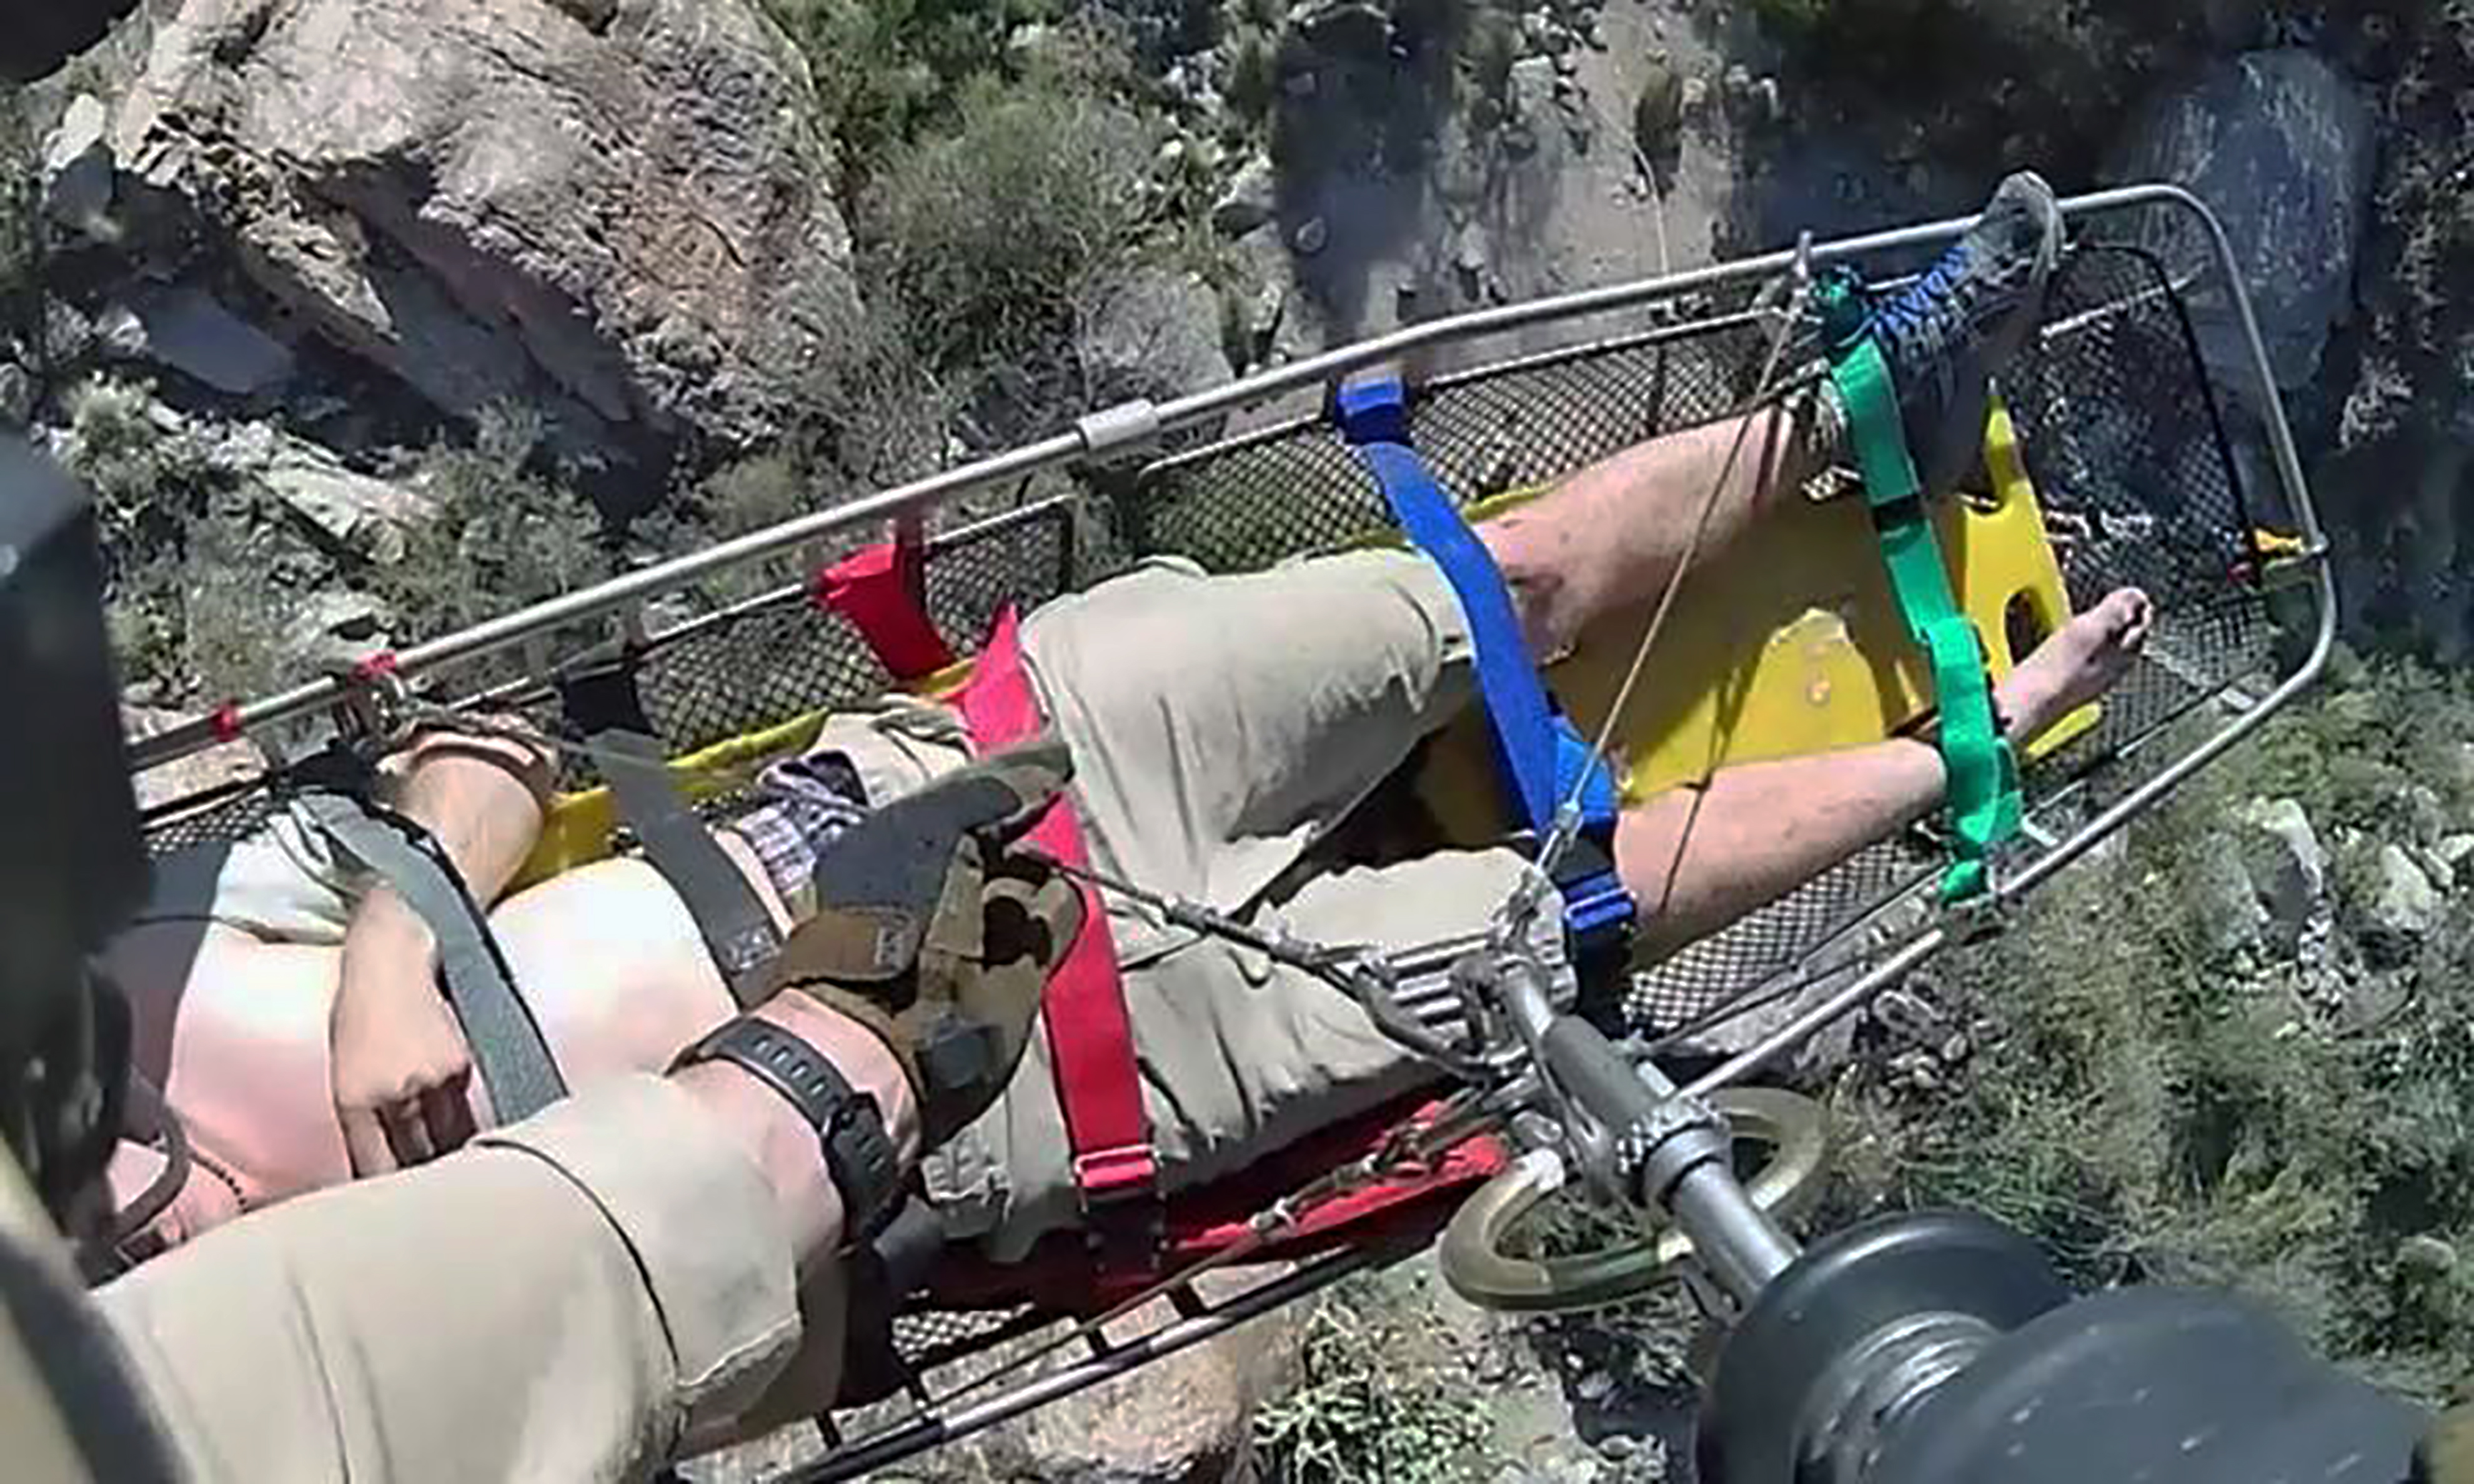 A hiker in medical distress was rescued by a CBP helicopter crew. 